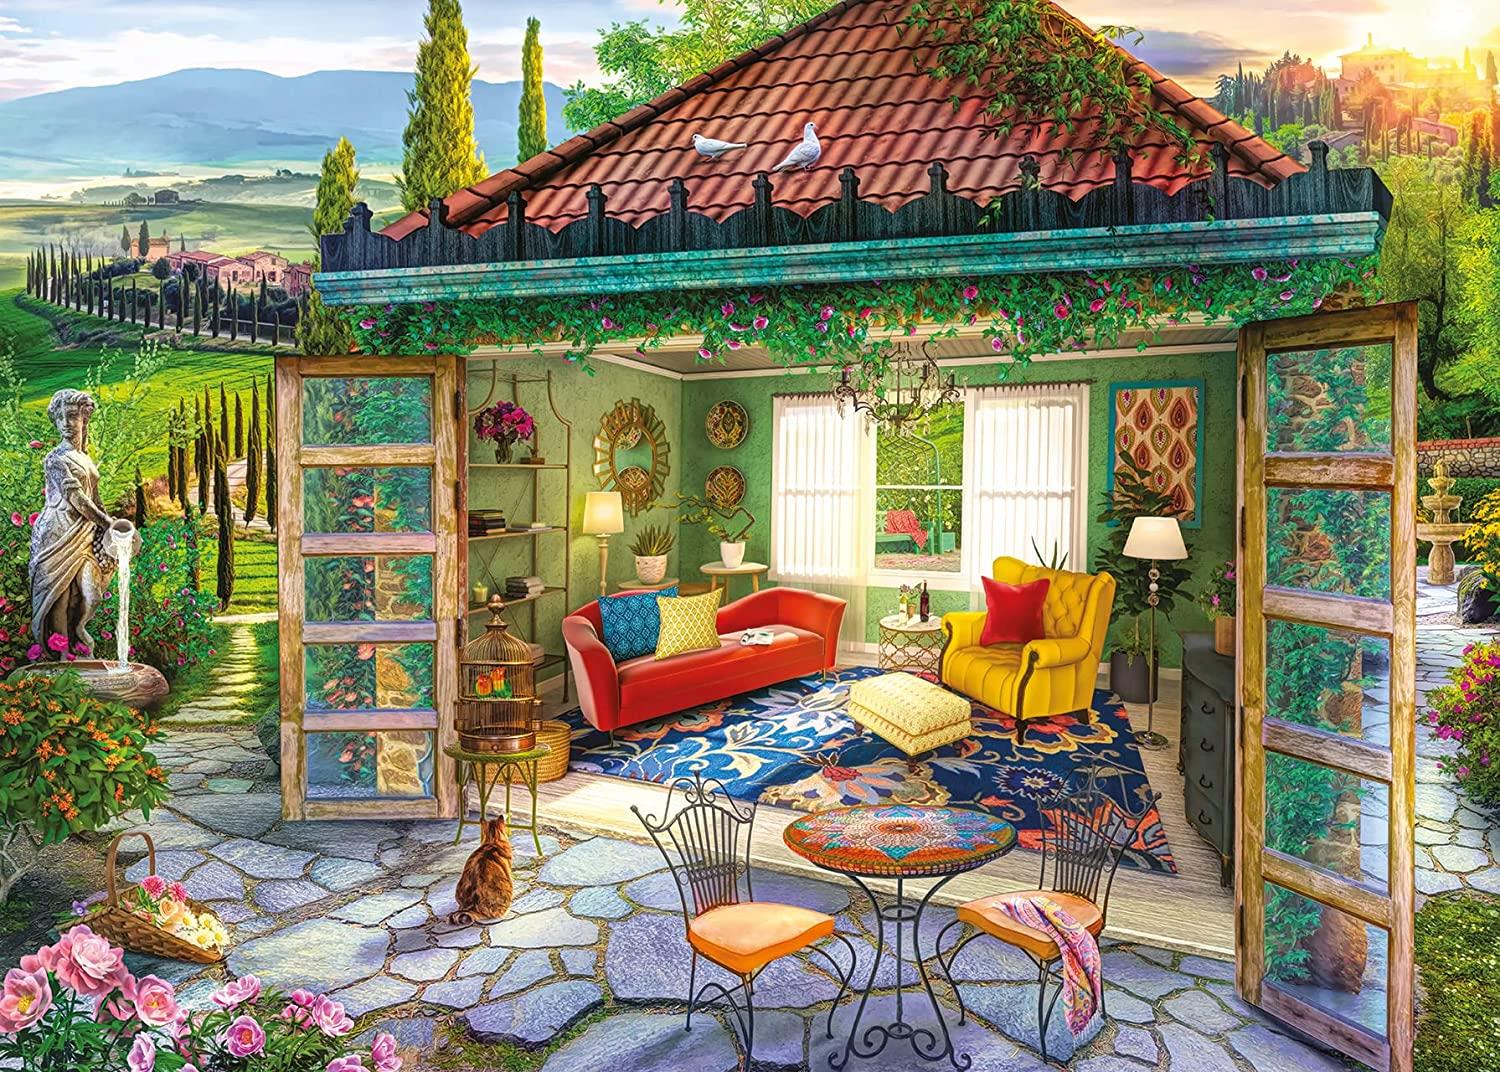 Ravensburger Tuscan Oasis Jigsaw Puzzle (1000 Pieces)